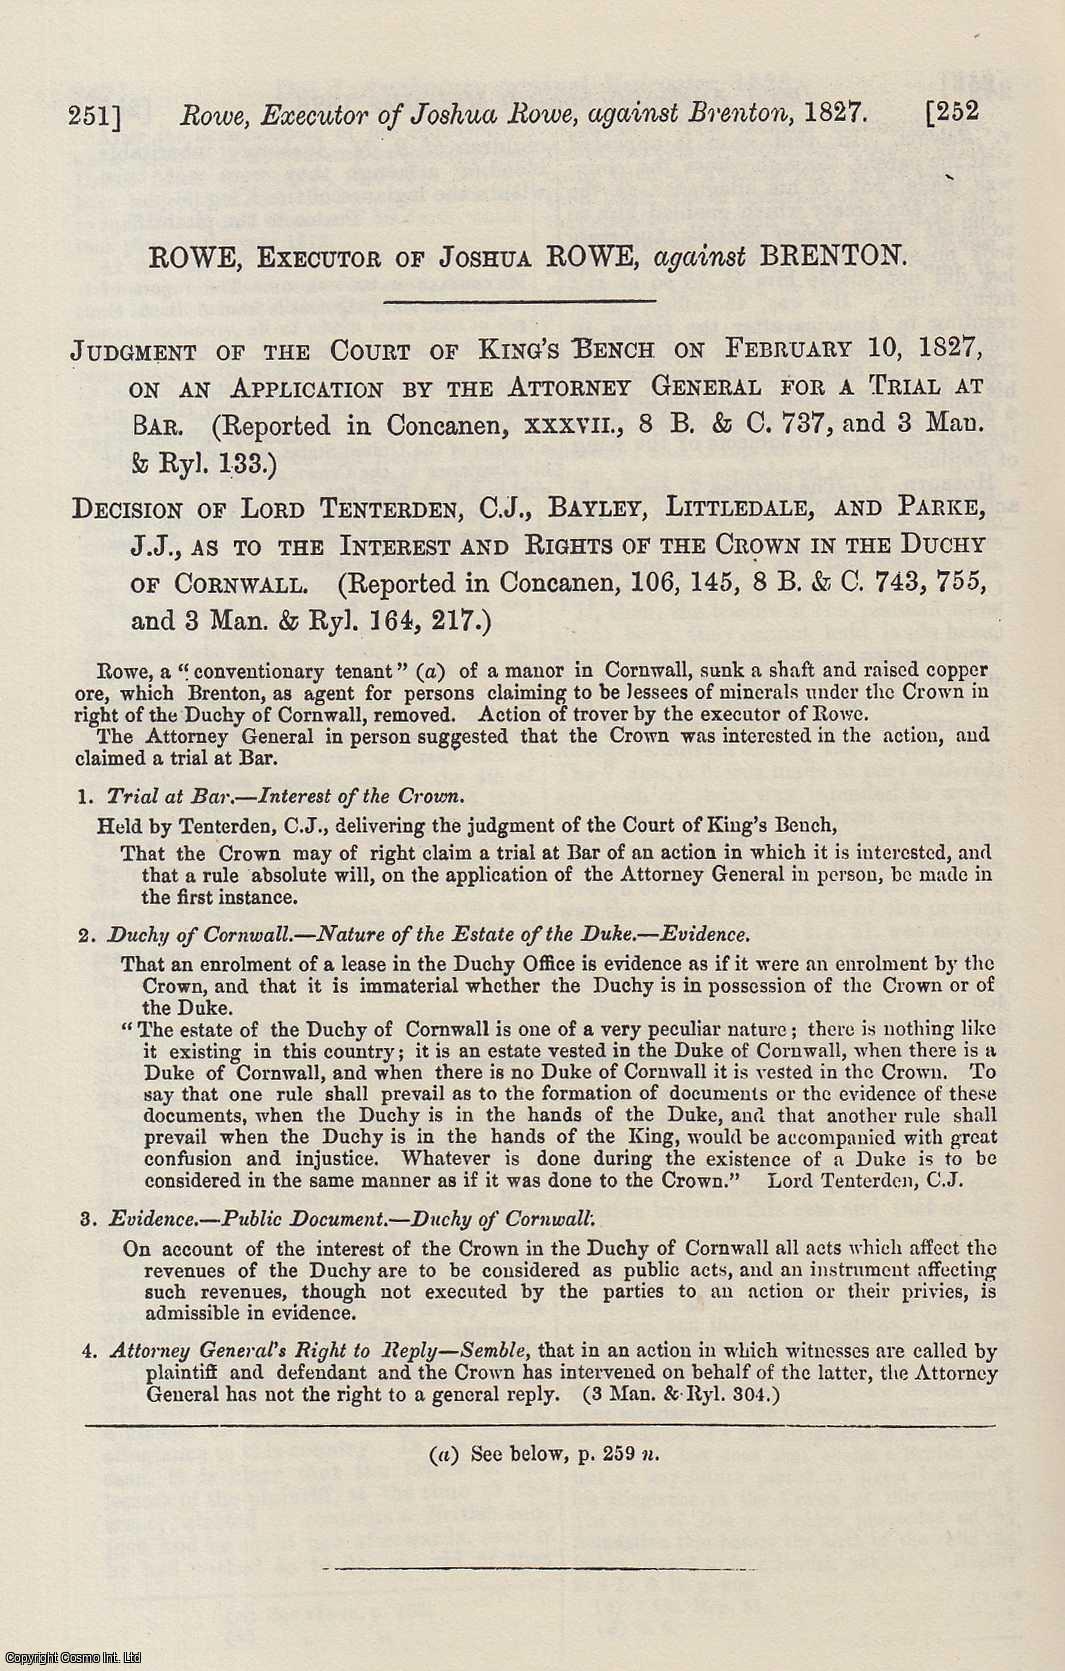 [Trial] - Rowe, Executor of Joshua Rowe, against Brenton. Decision as to the Interest and Rights of the Crown in the Duchy of Cornwall. An original printing from the Reports of State Trials.